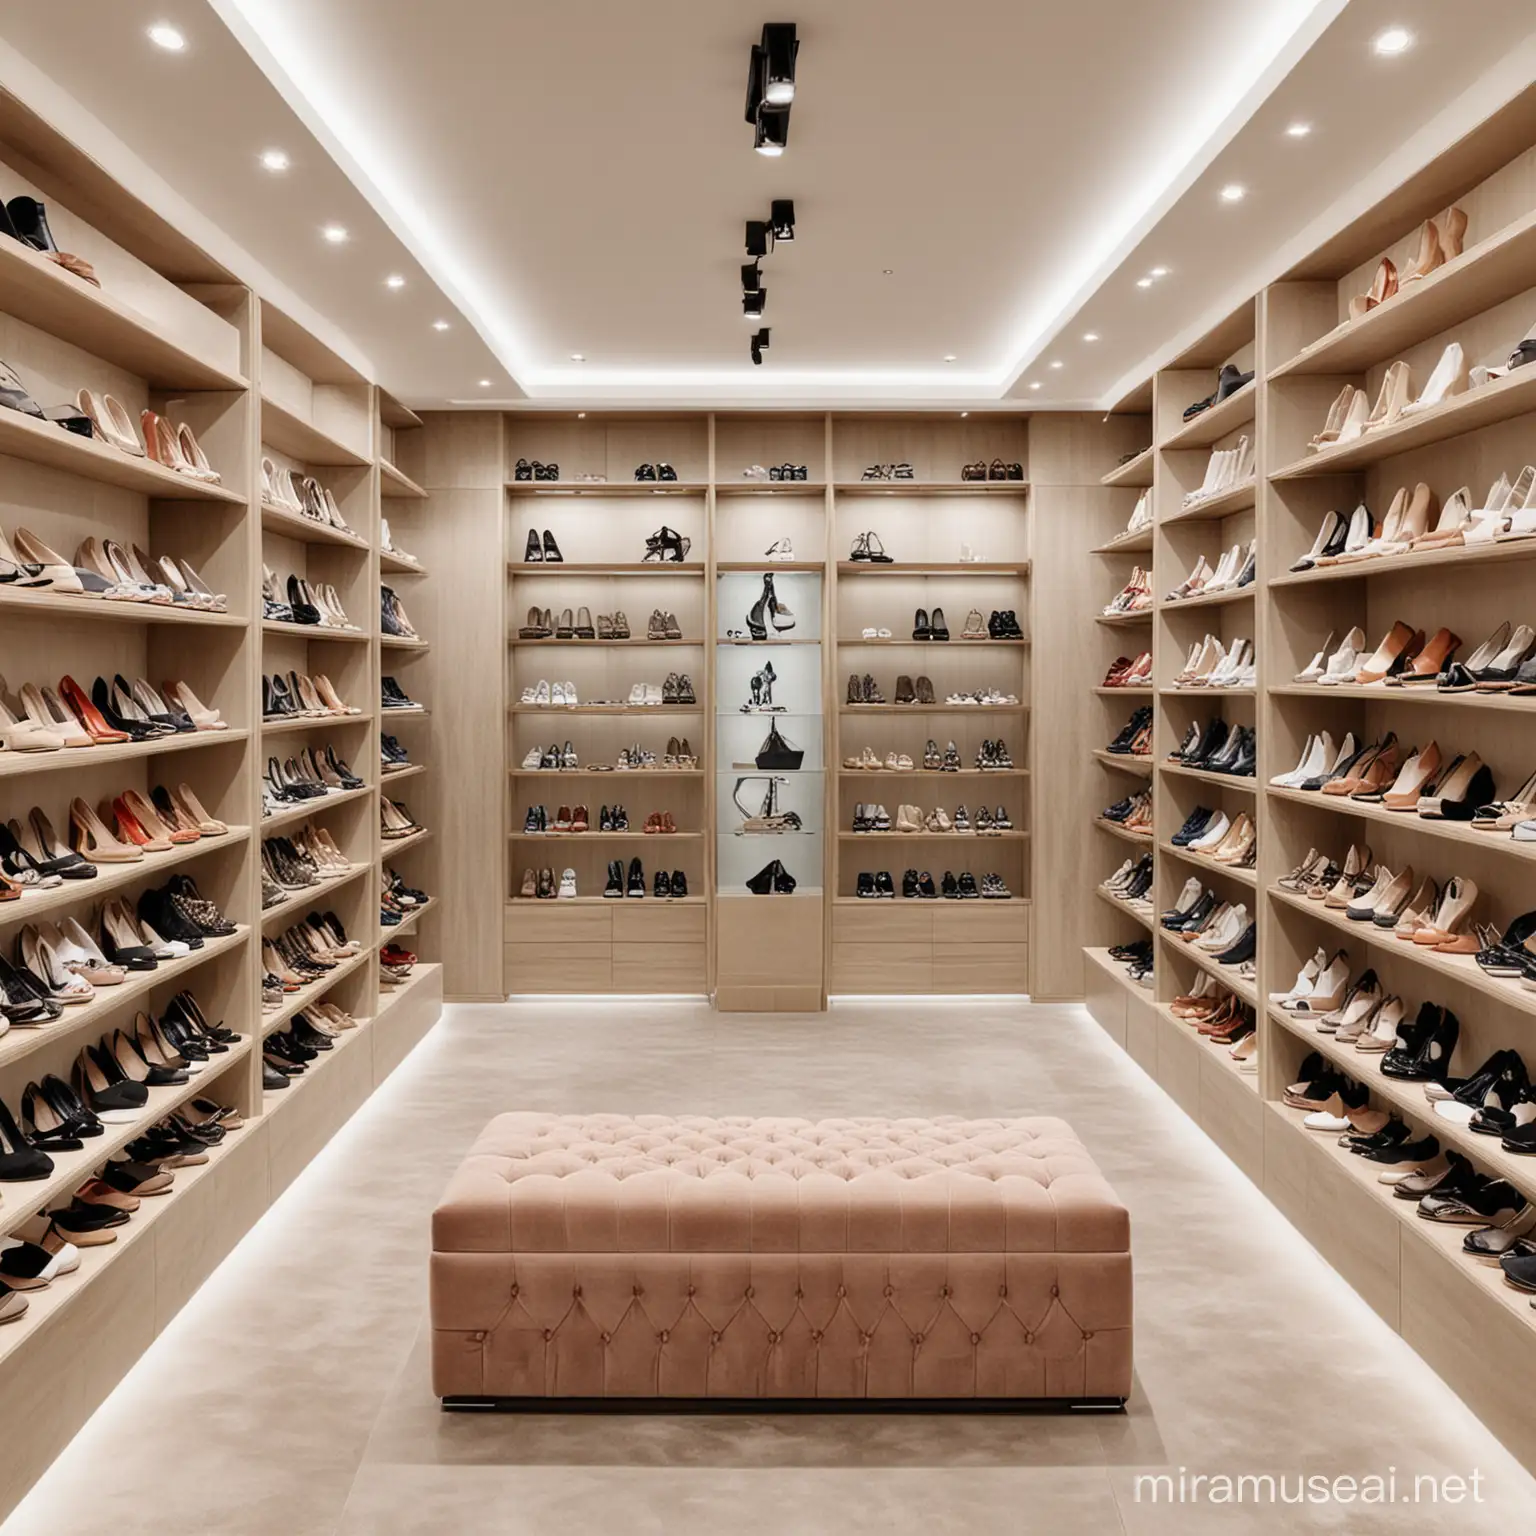 A interior design with shelves for a shop with shoes for women